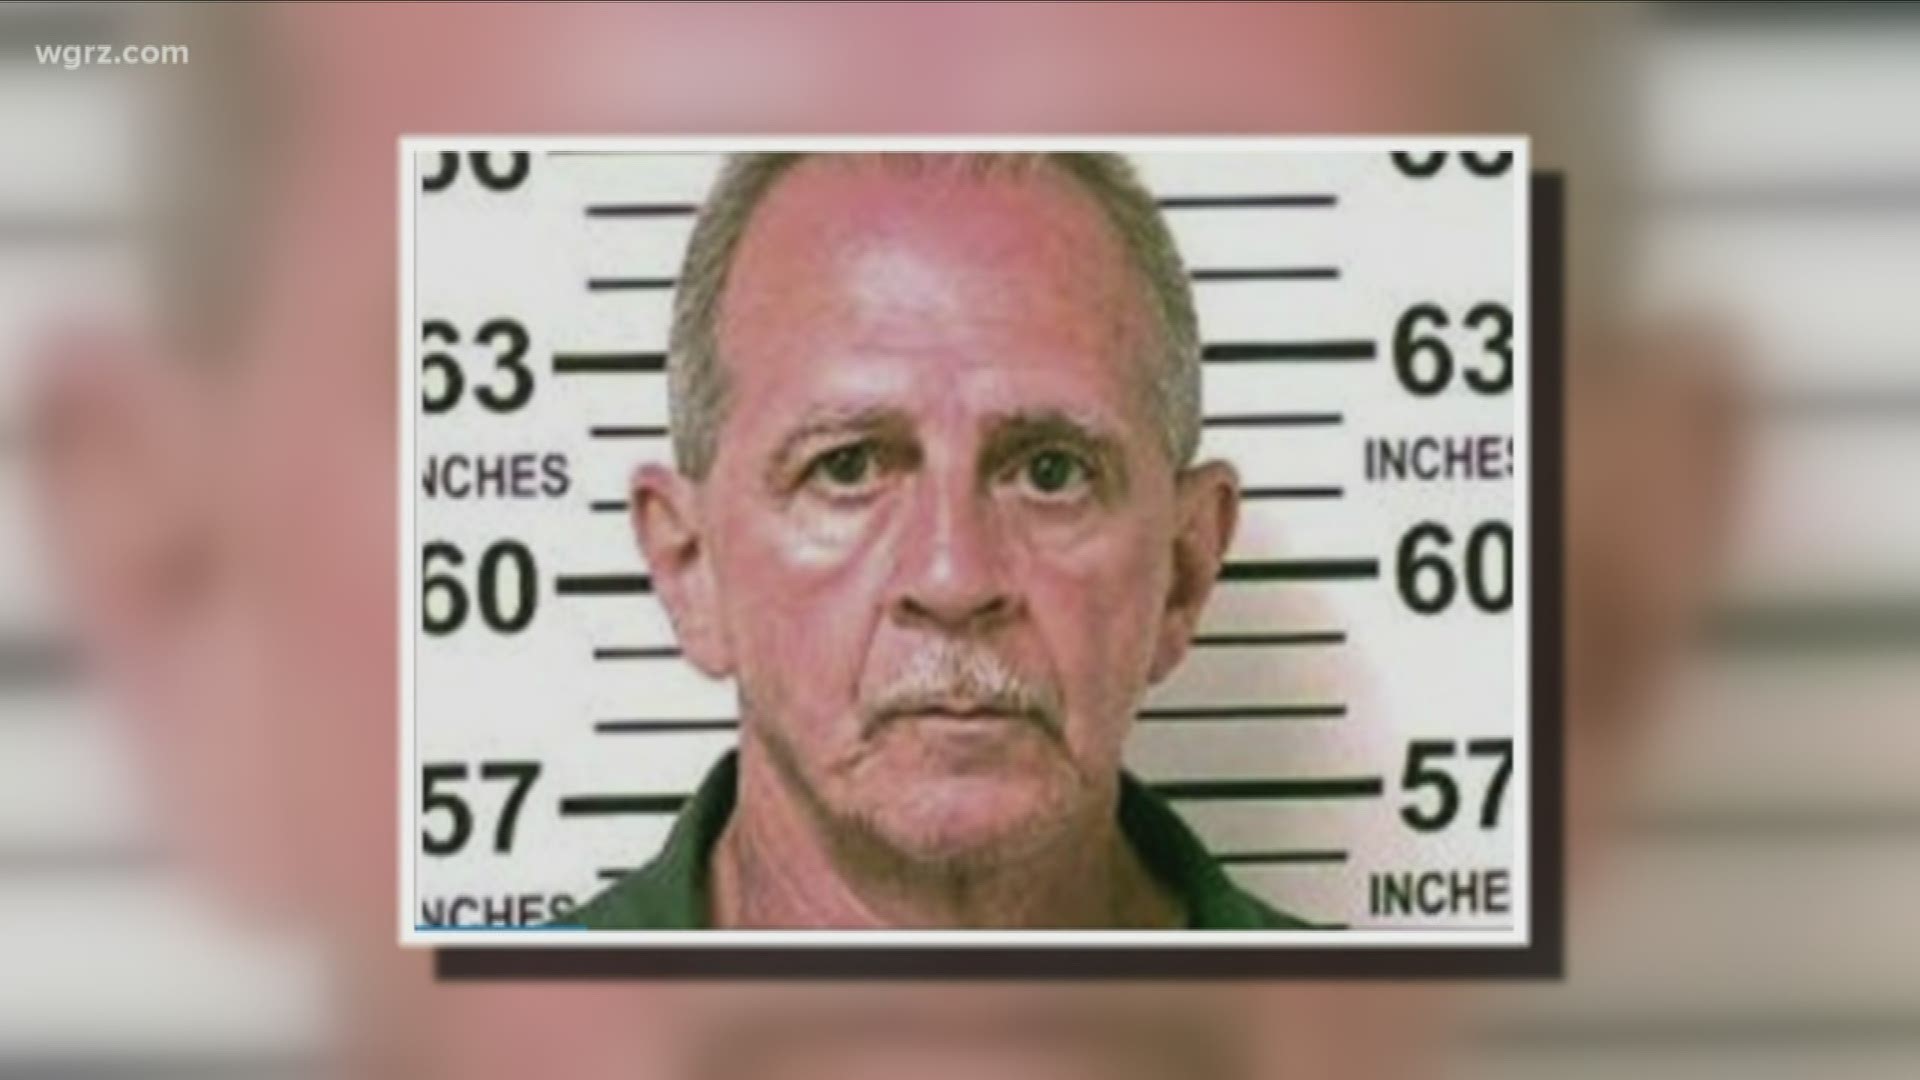 Richard LaBarbera spent decades behind bars for the 1980 rape and murder of a 16 year-old girl just outside New York City. The state ordered him to move to Buffalo to be far away from the victim's family.